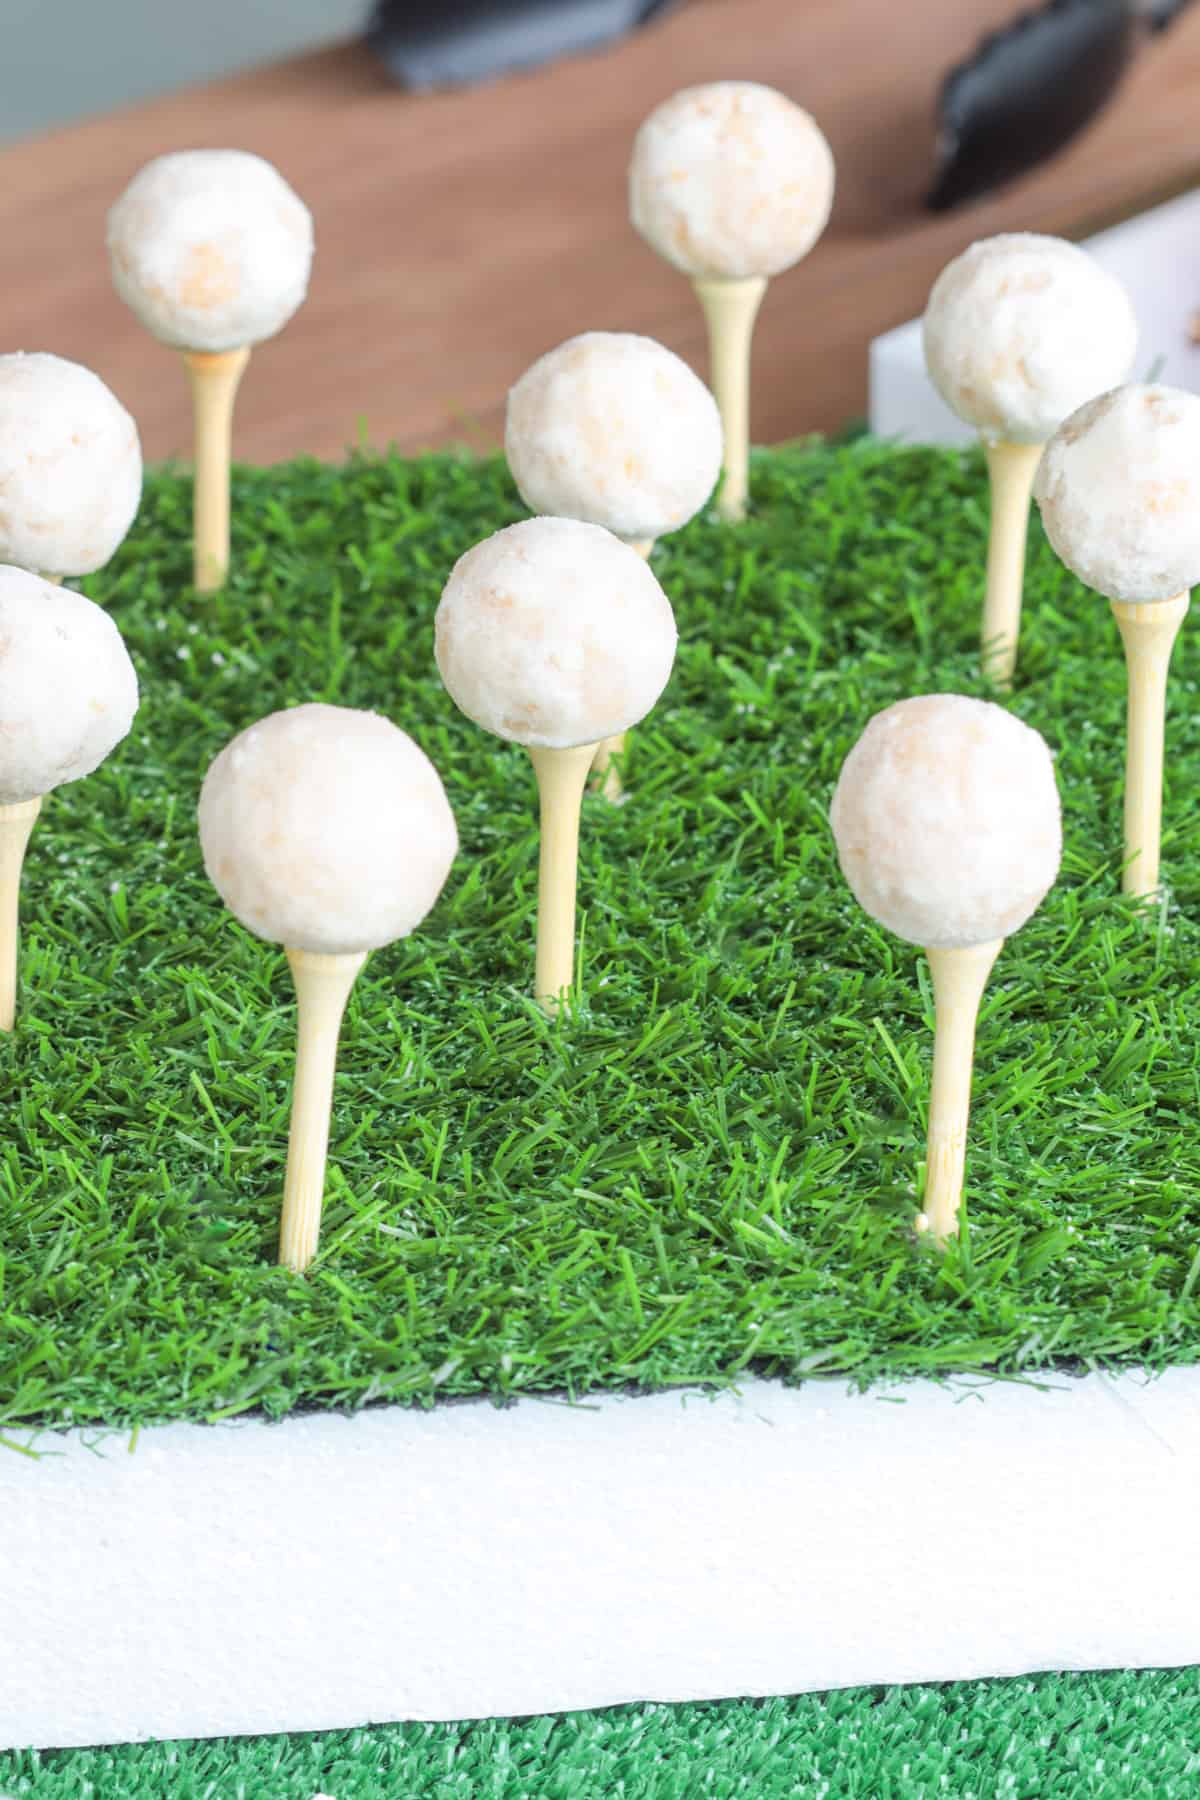 Golf tees in turf with donut holes on top.